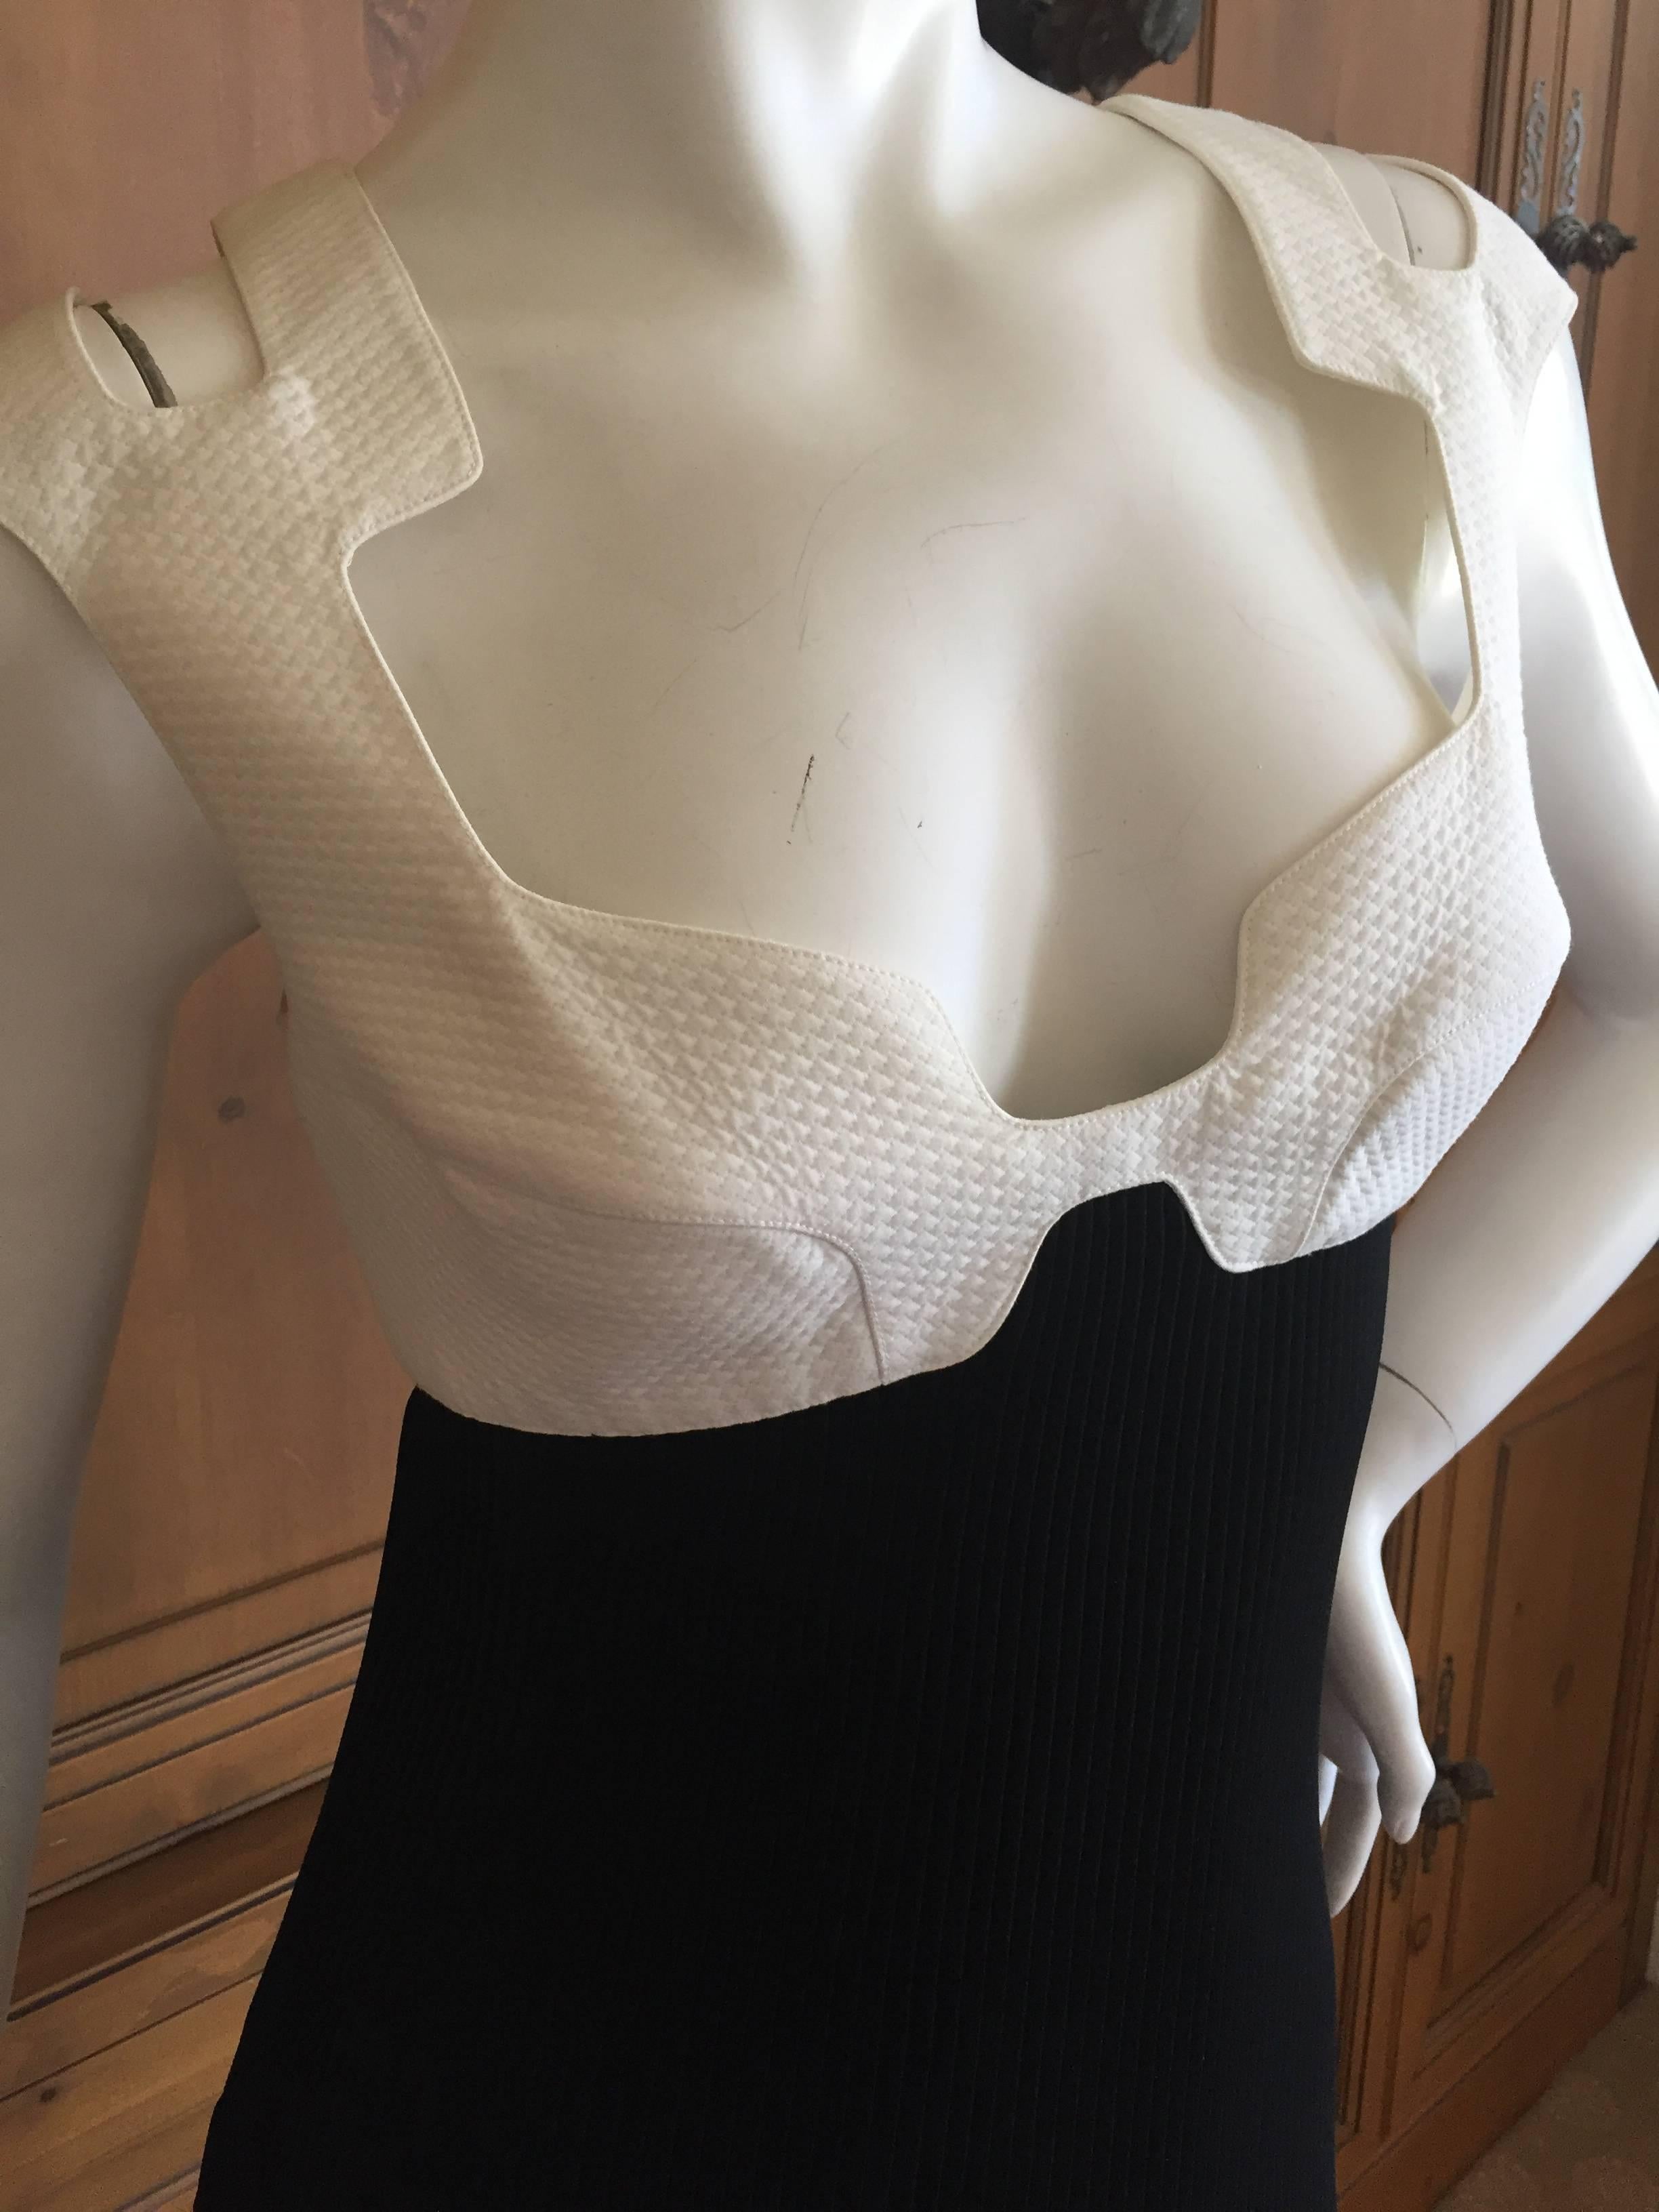 Wonderful low cut black and white dress from Thierry Mugler circa 1988.
The top is white cotton pique, cut with a revealing decolettage and shoulders.
The bottom is a ribbed fabric , which has a lot of stretch for size.
Size 38
Bust 38 
Waist